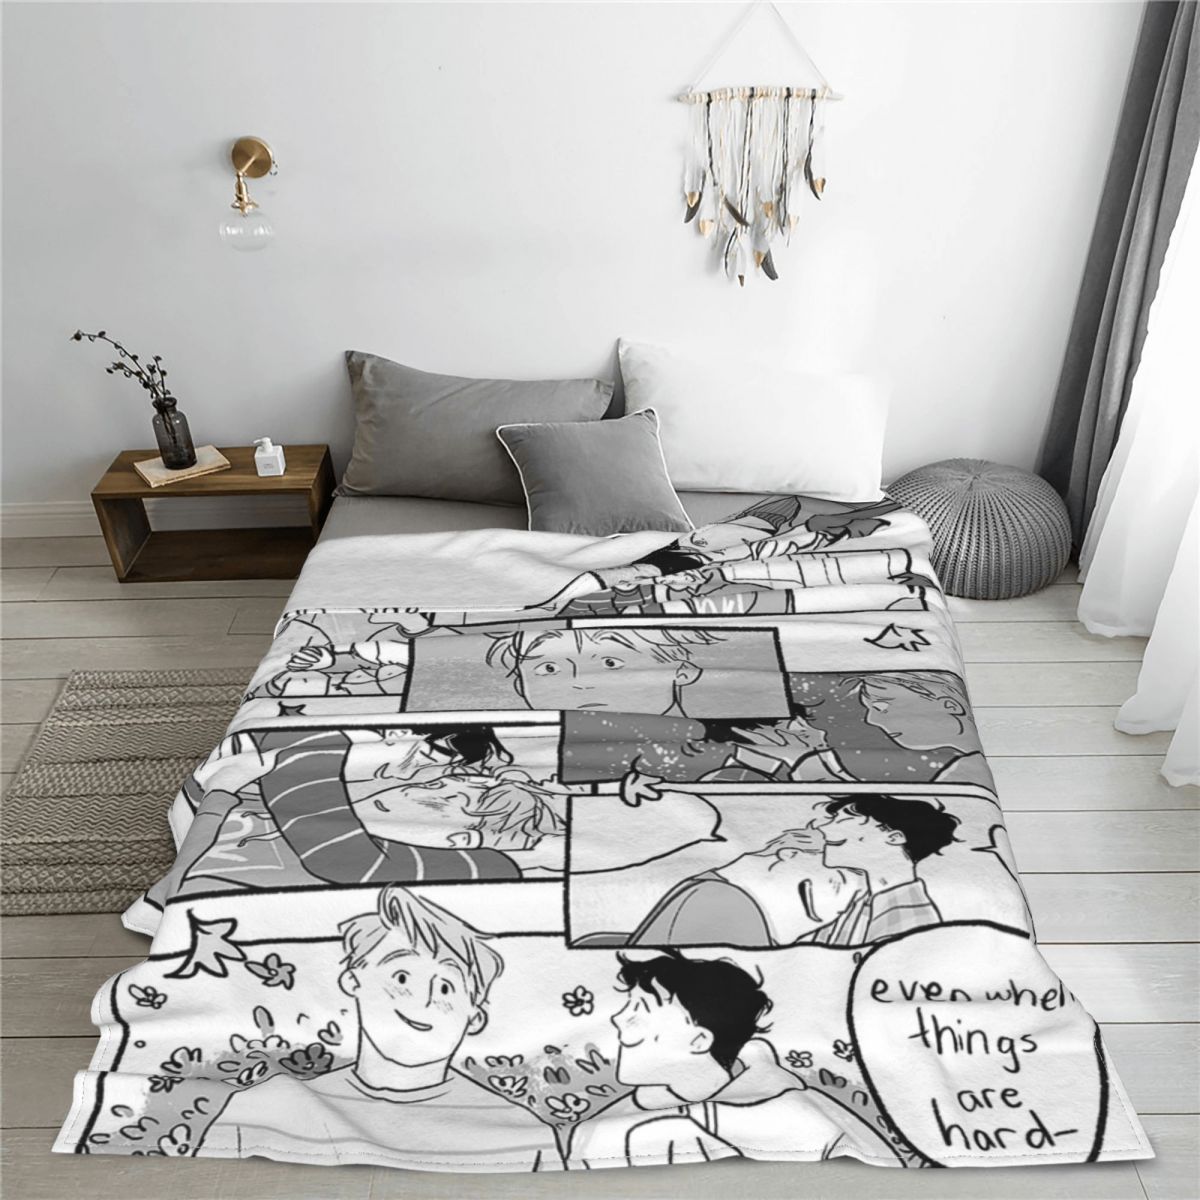 Heartstopper Lgbt Manga Blanket Romance Nick Charlie Yaoi Flannel Throw Blanket Summer Air Conditioning Soft Warm Bedspreads